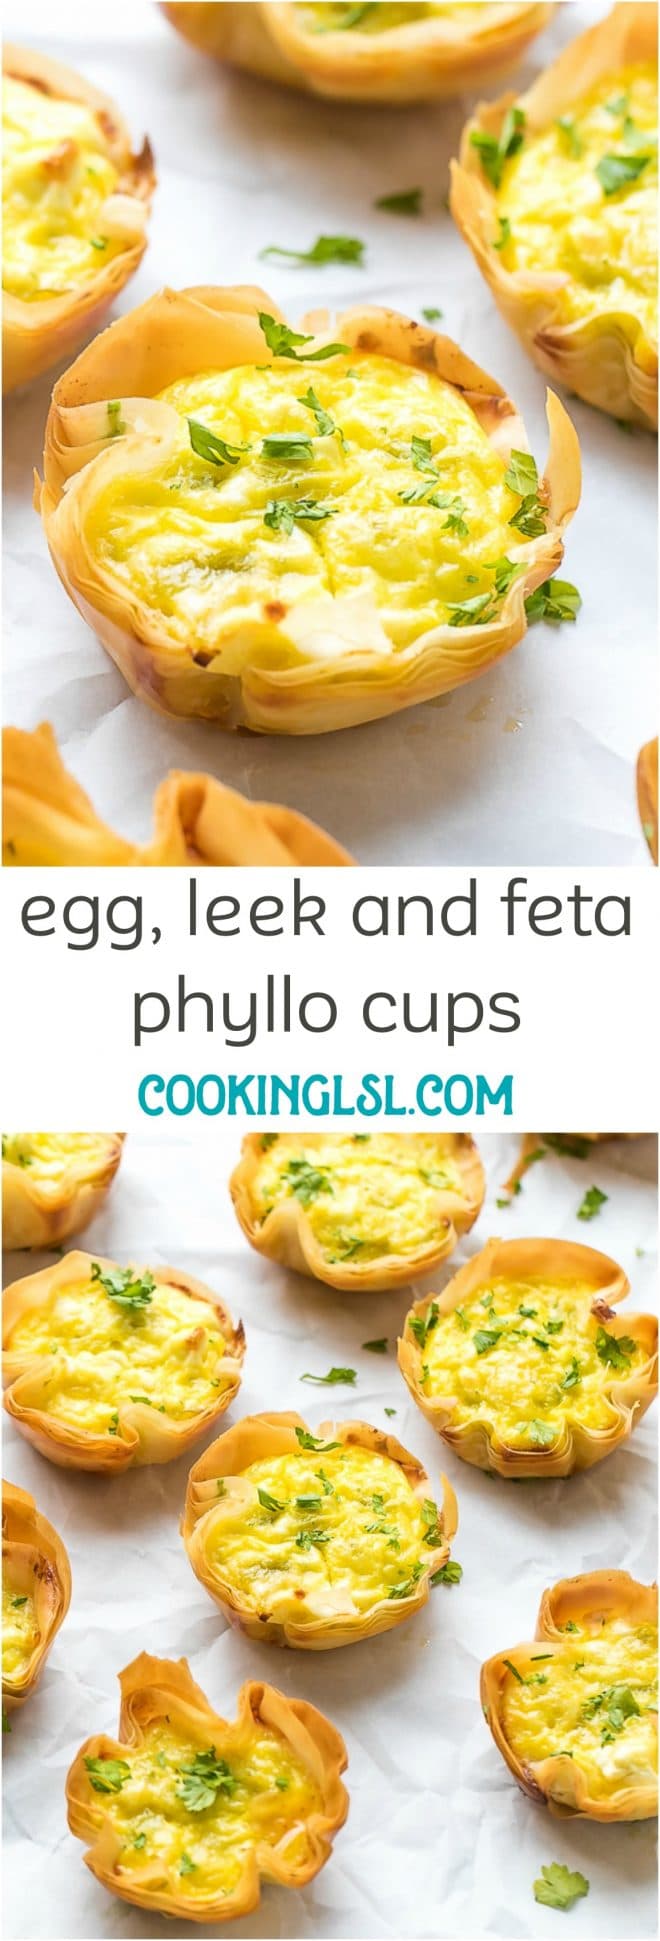 Egg, Leek and Feta Phyllo Cups Recipe. Perfect for breakfast, snack or an appetizer.